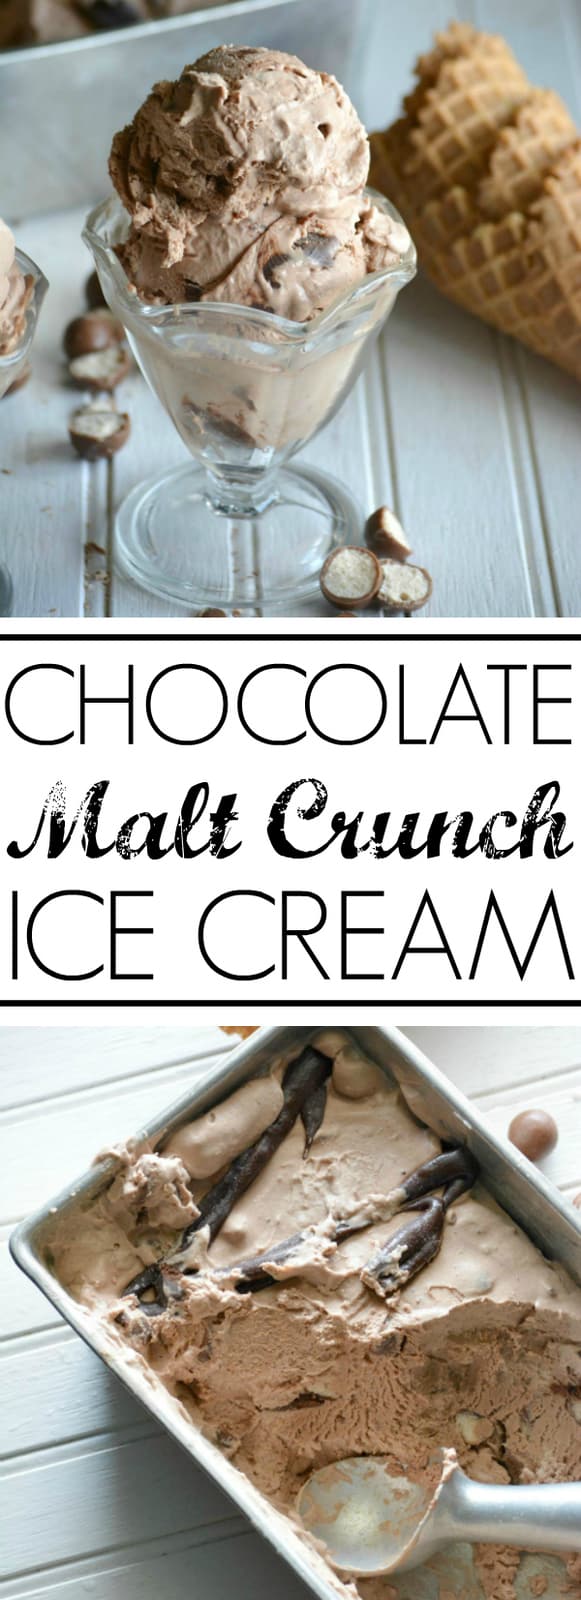 Chocolate Malt Crunch Ice Cream Pinterest image with words in middle